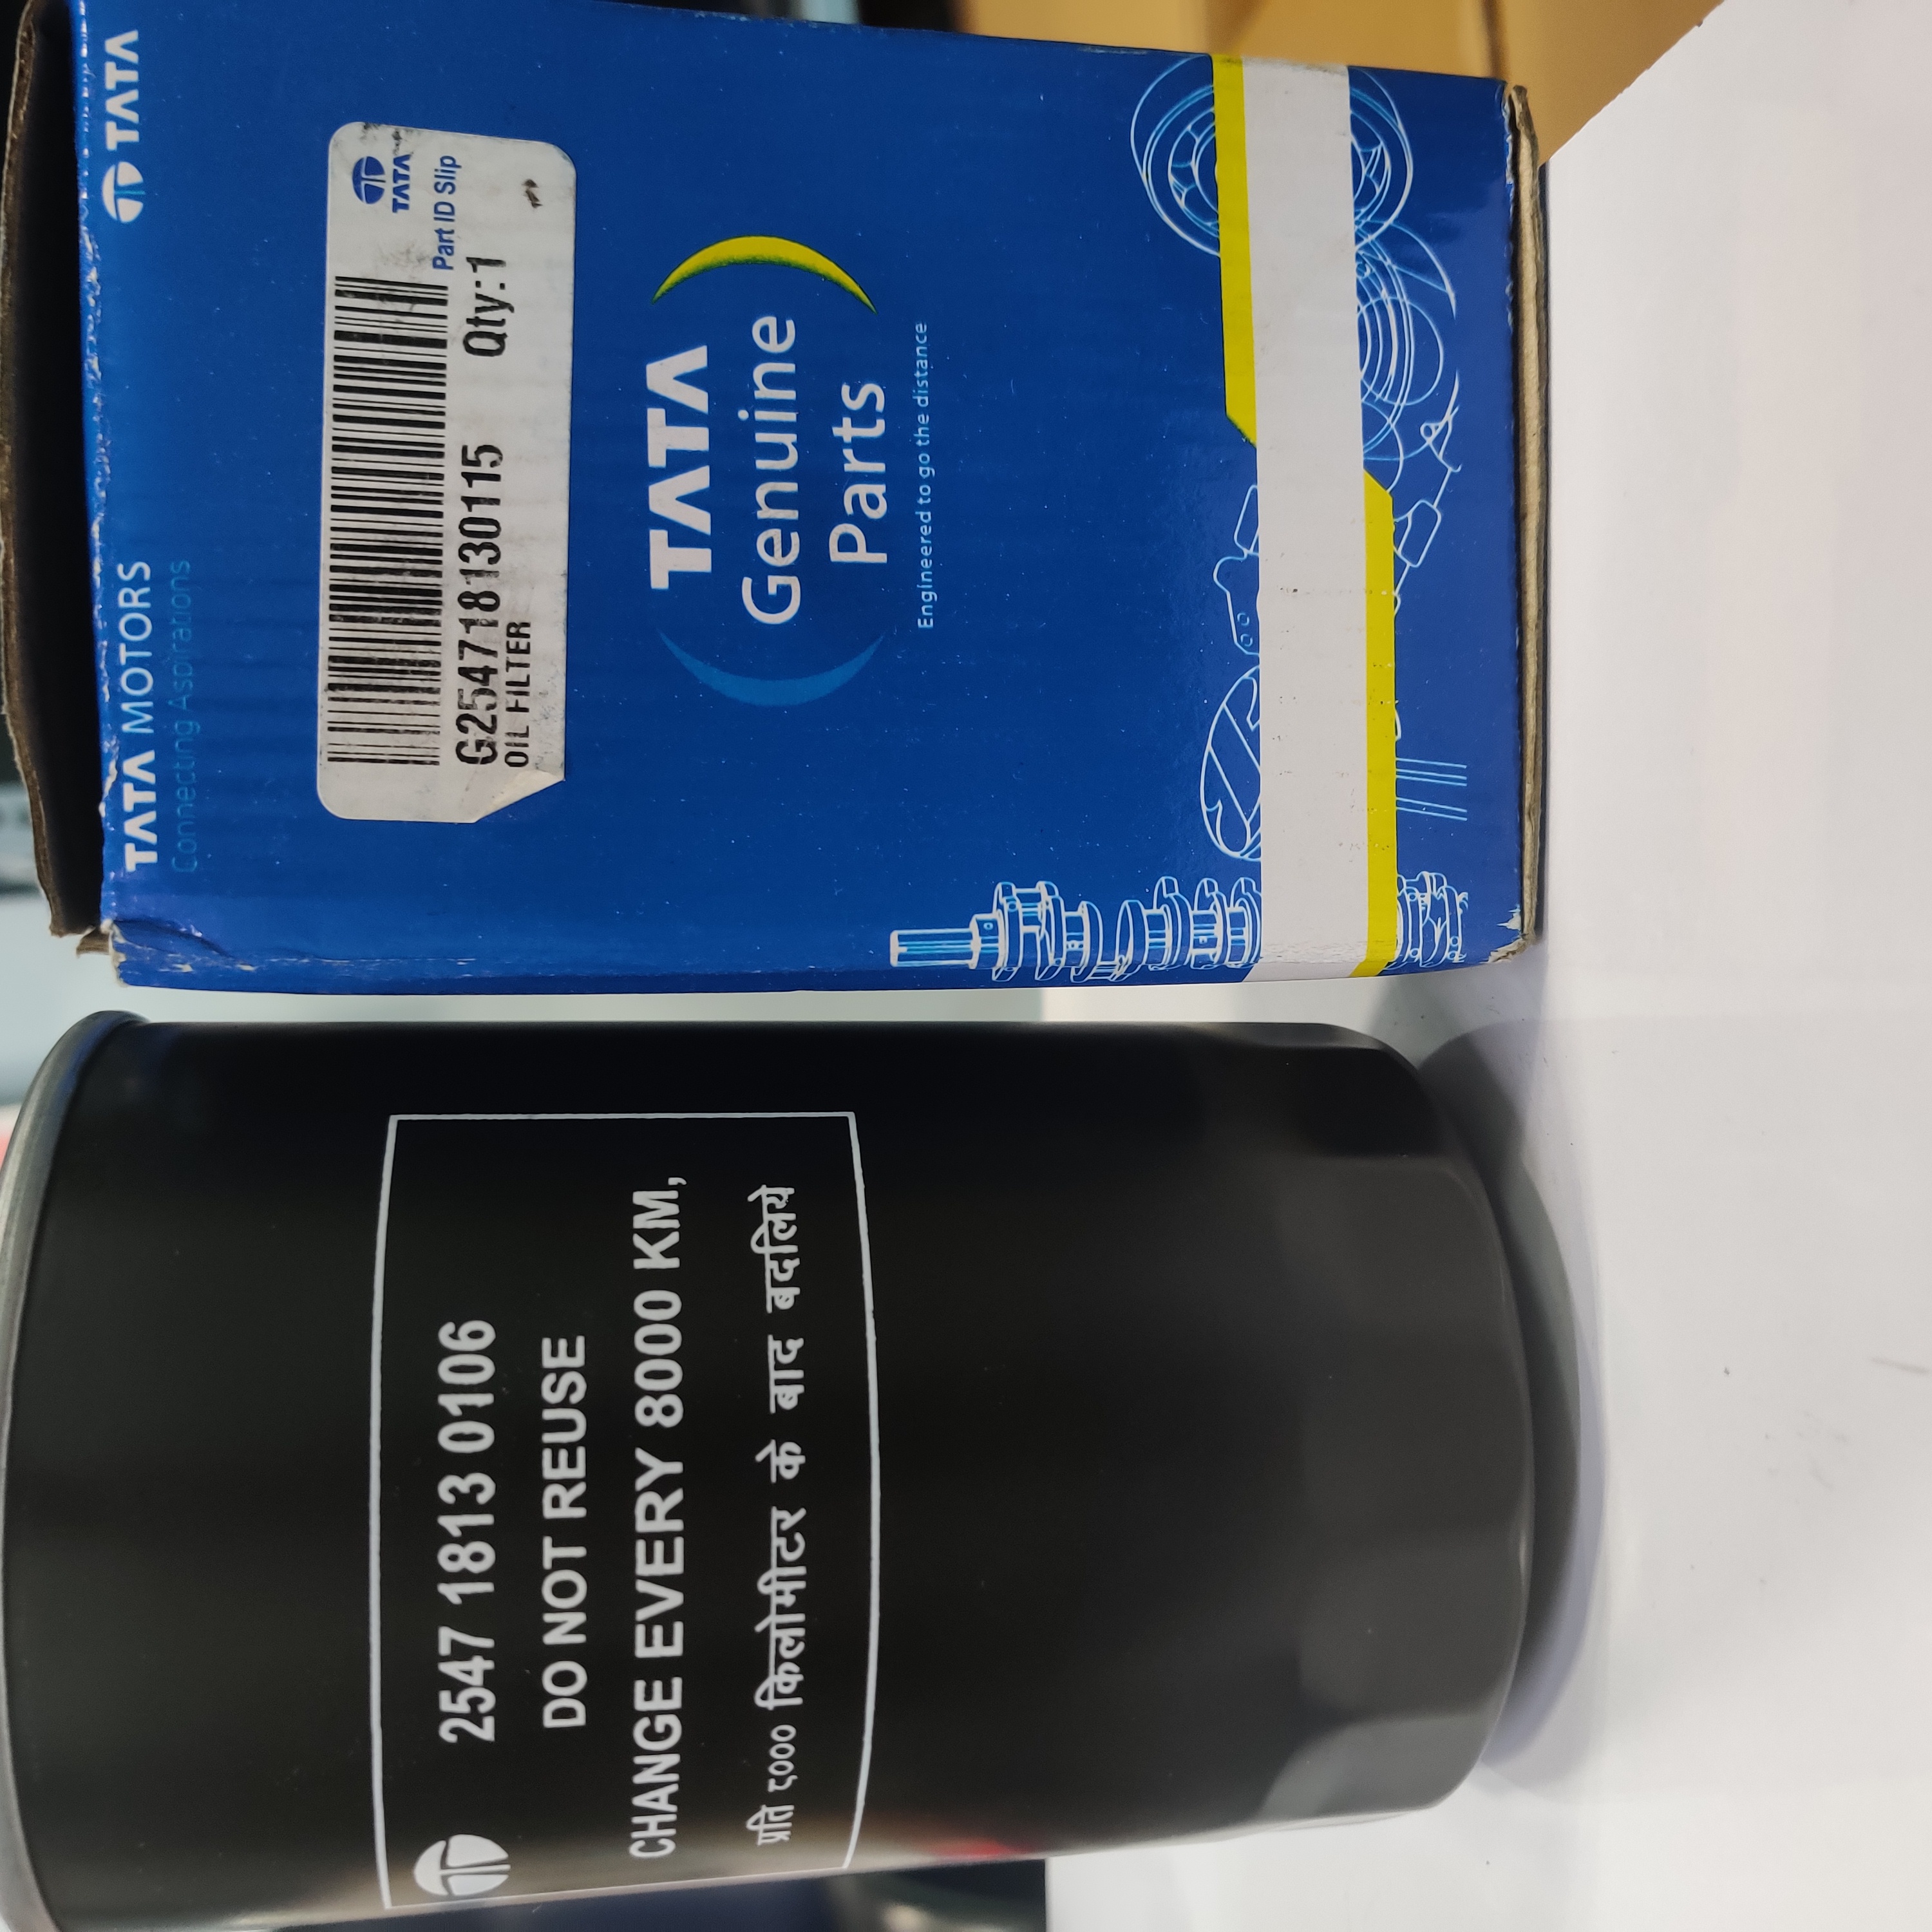 TATA TELCOLINE ASSEMBLY OIL FILTER 254718130115 STOCKID 1246